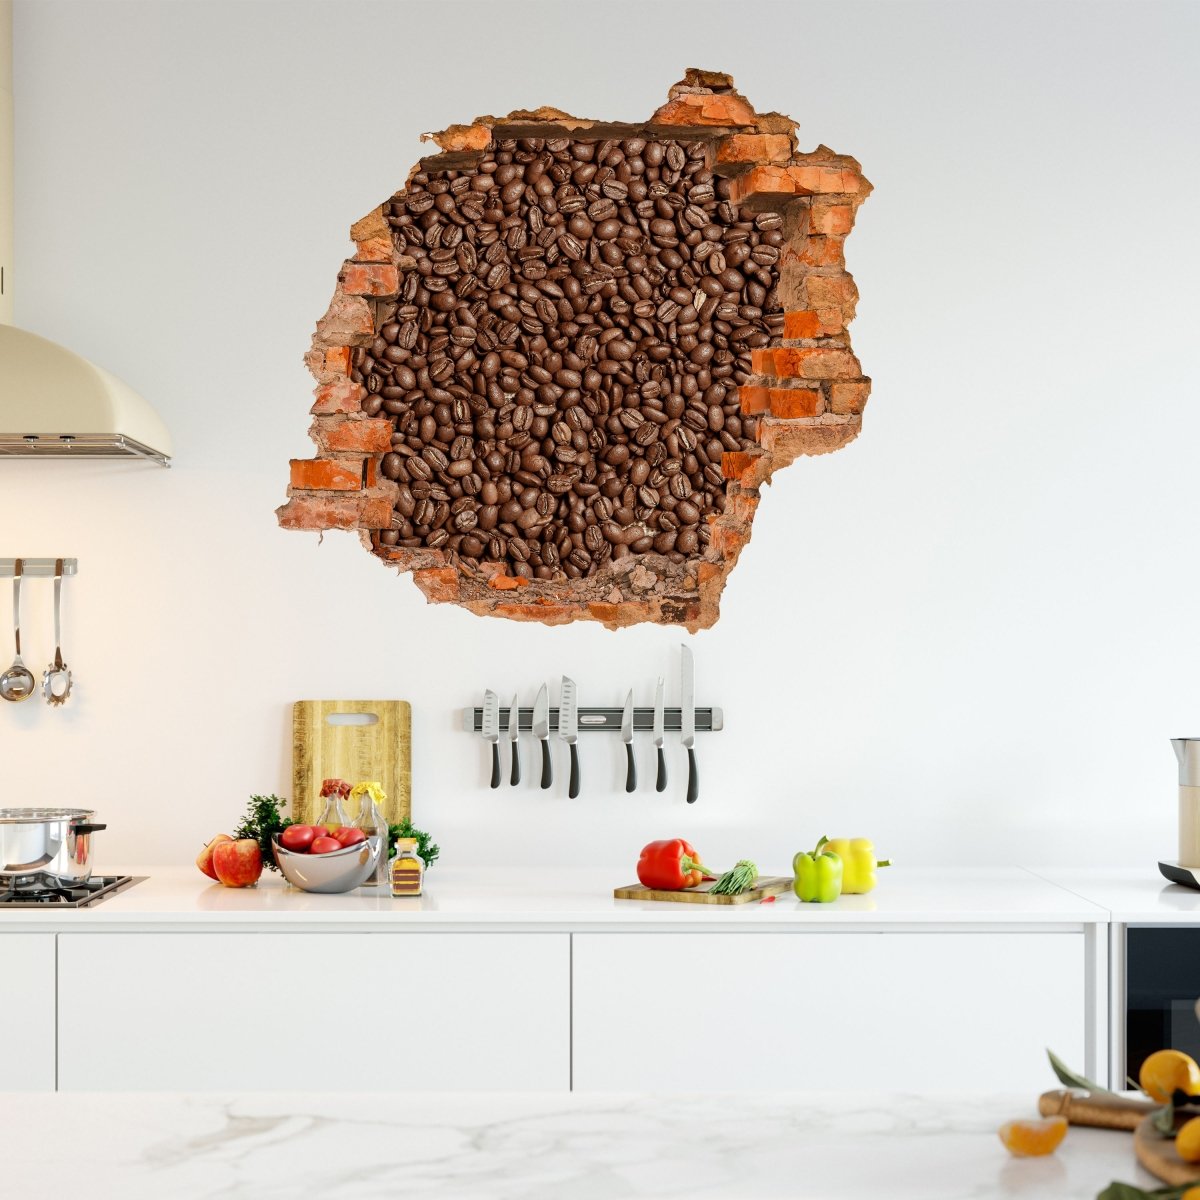 Roasted brown coffee bean 3D wall sticker - Wall Decal M0843